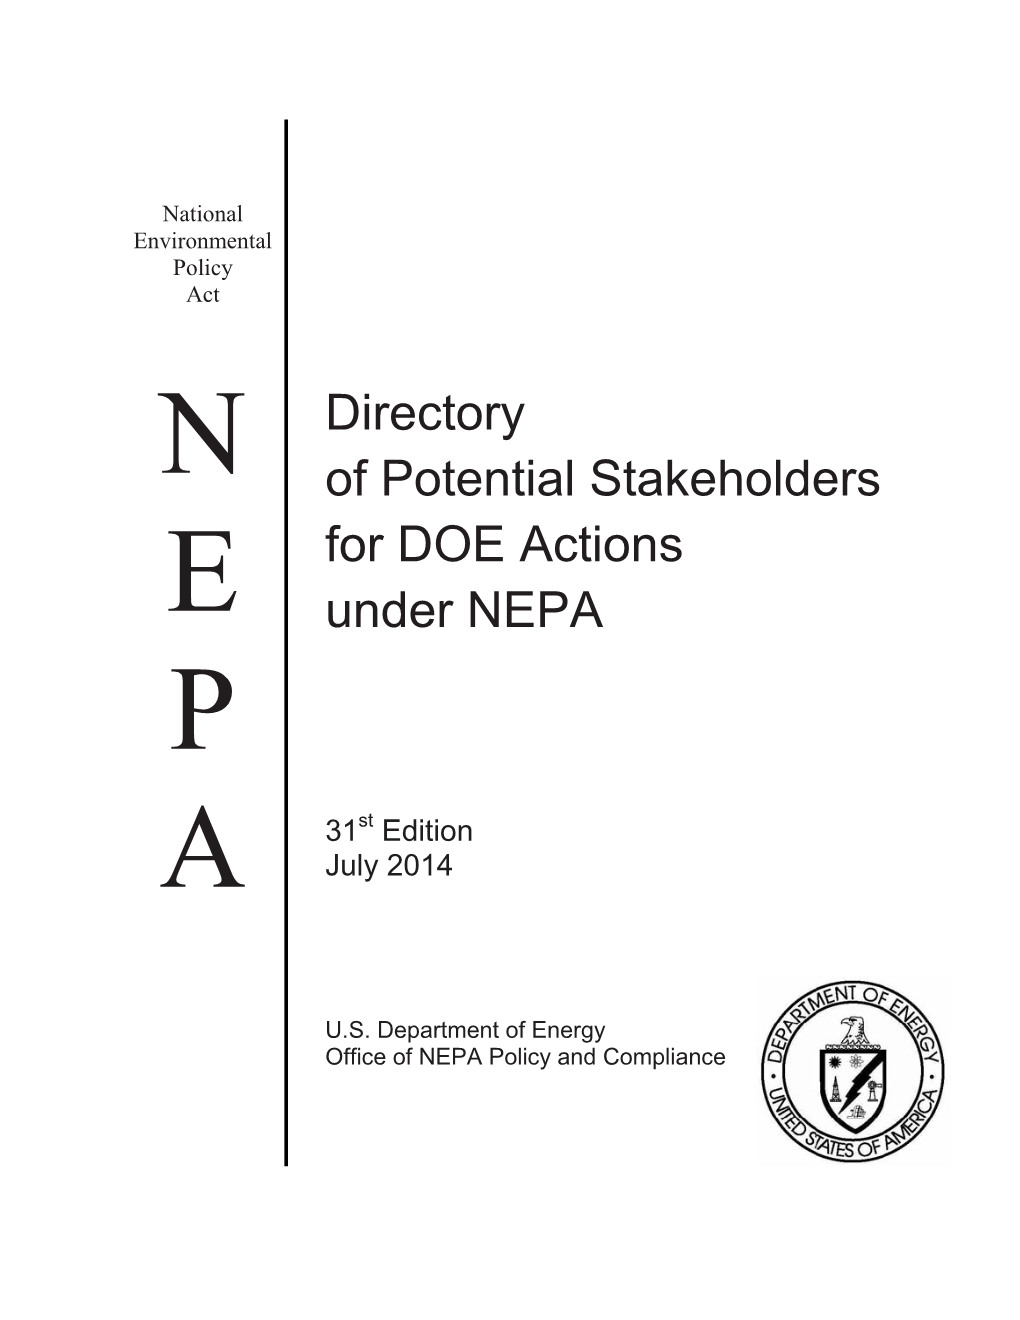 Directory of Potential Stakeholders for DOE Actions Under NEPA